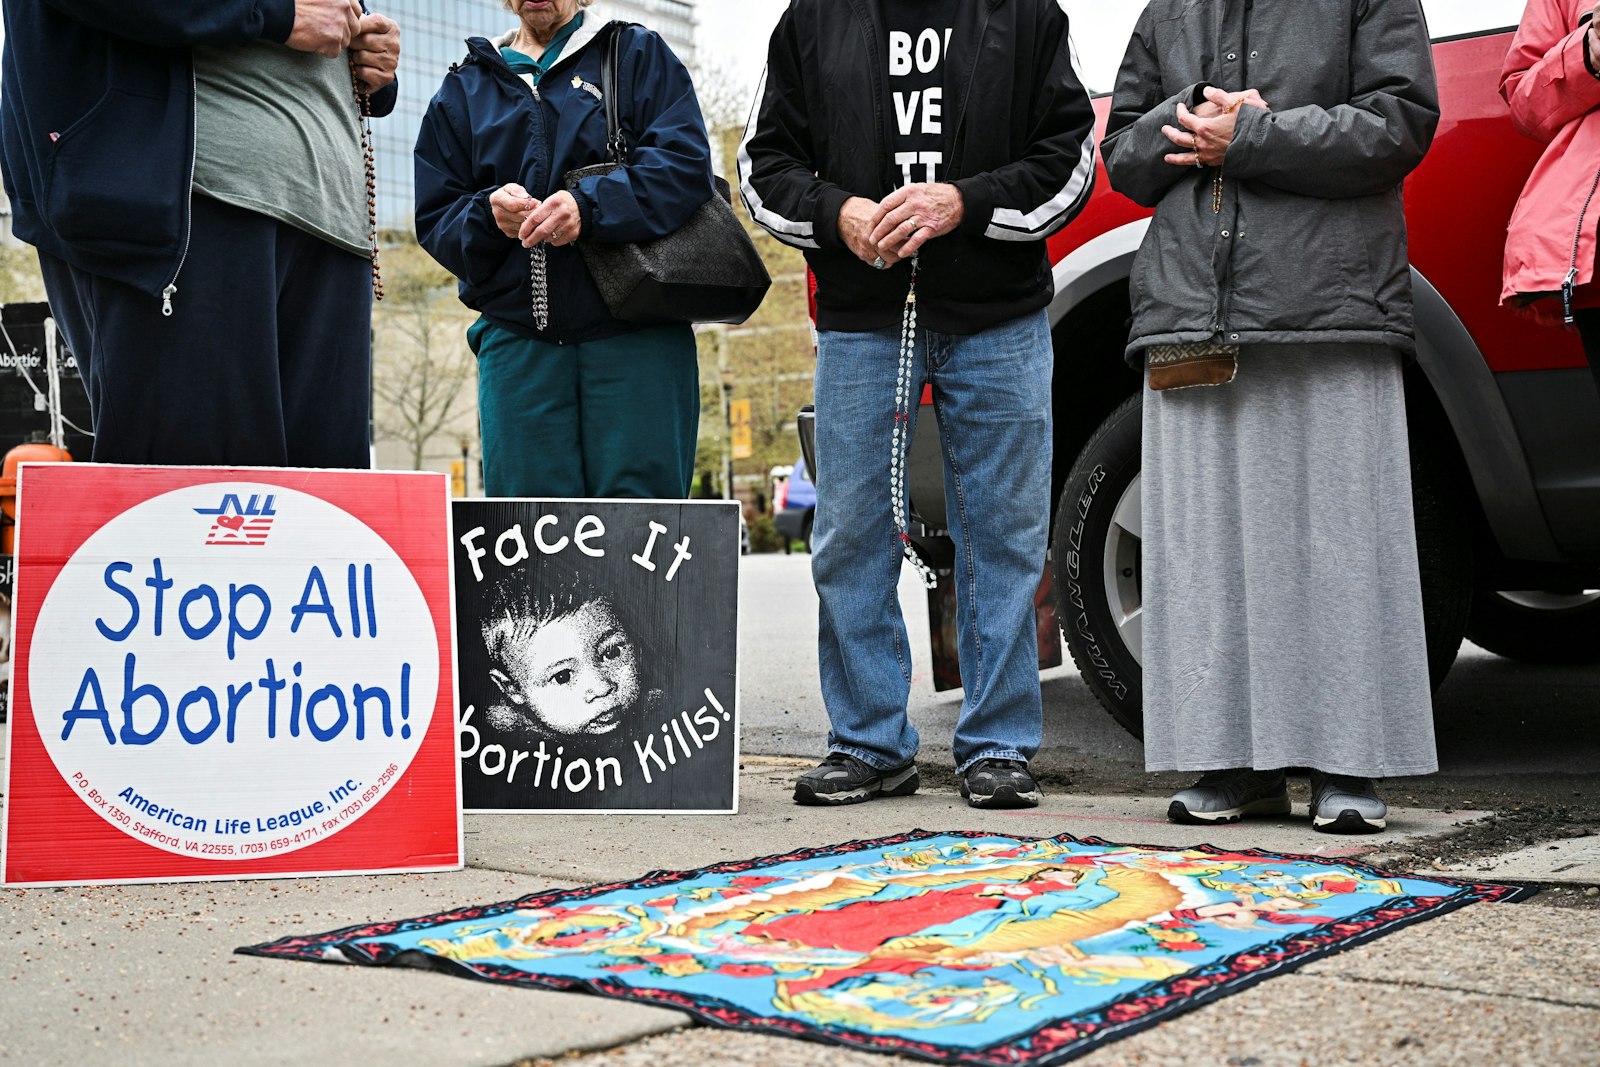 Pro-life demonstrators in Louisville, Ky., gather to pray outside the EMW Women's Surgical Center April 16, 2022. (CNS photo/Jonathan Cherry, Reuters)